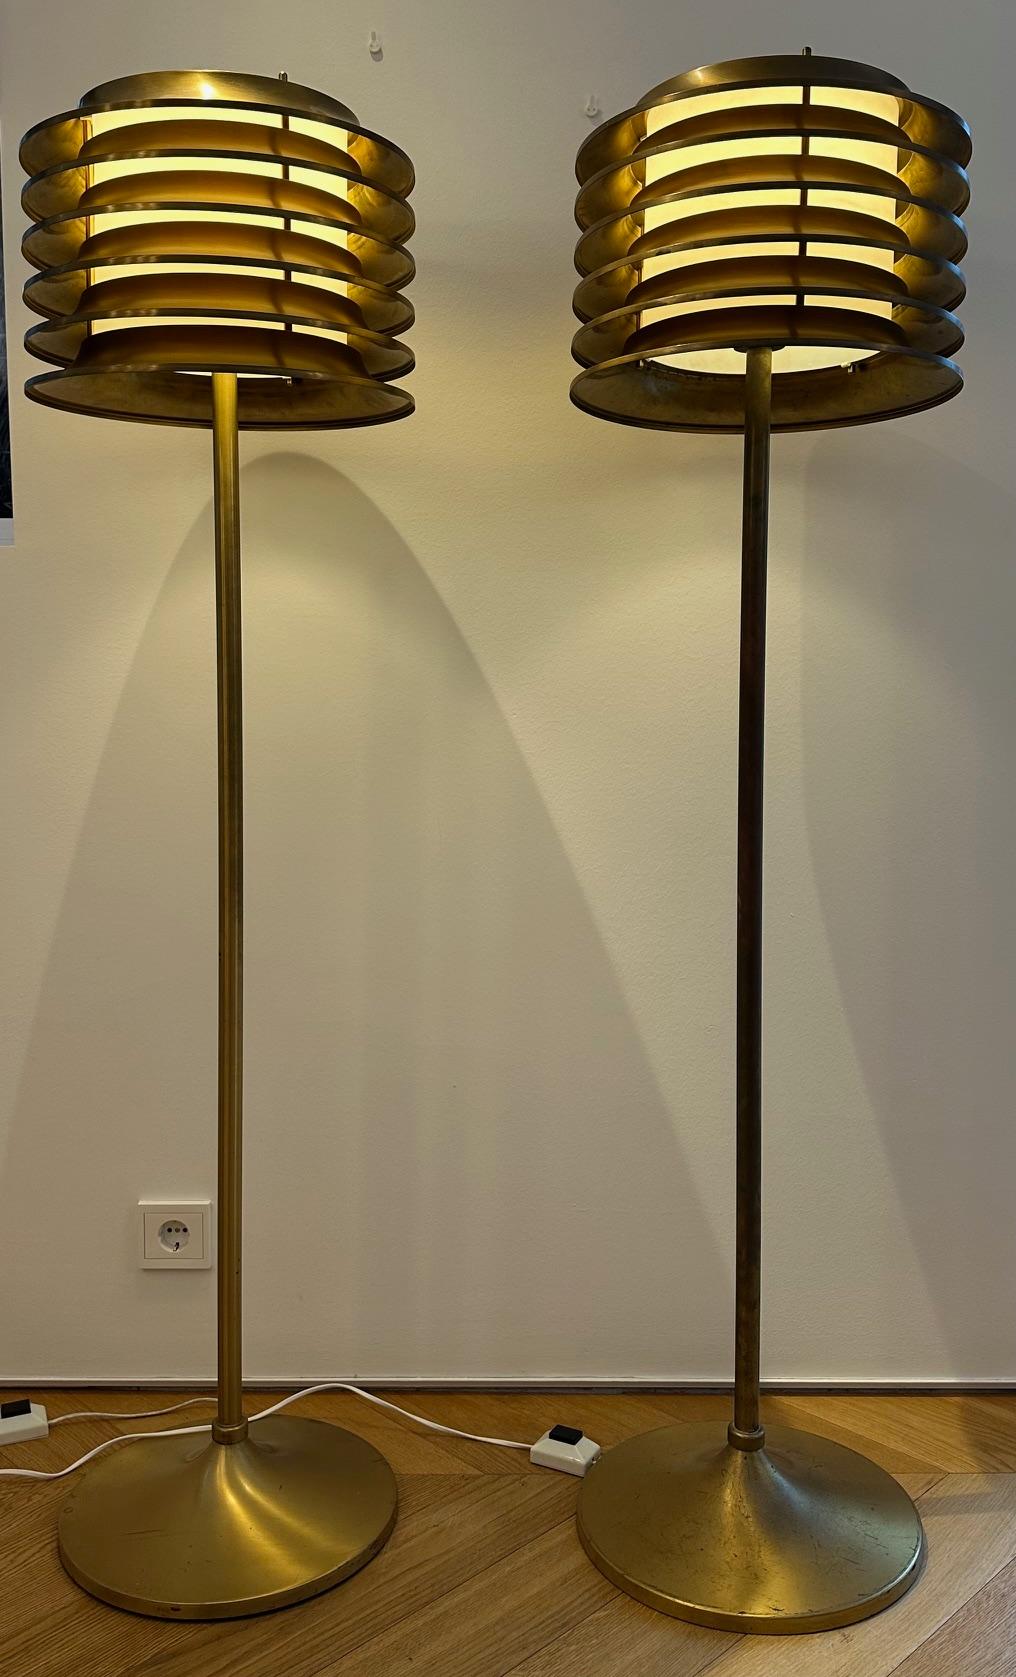 These lamps were designed by Kai Ruokonen (Finnmark) for the Vaakuna Hotel in Helsinki in the 1970s.  A very simple yet elegant heavy duty lamp in full brass with a beautiful patina.

This is a very unique opportunity to buy a pair of these